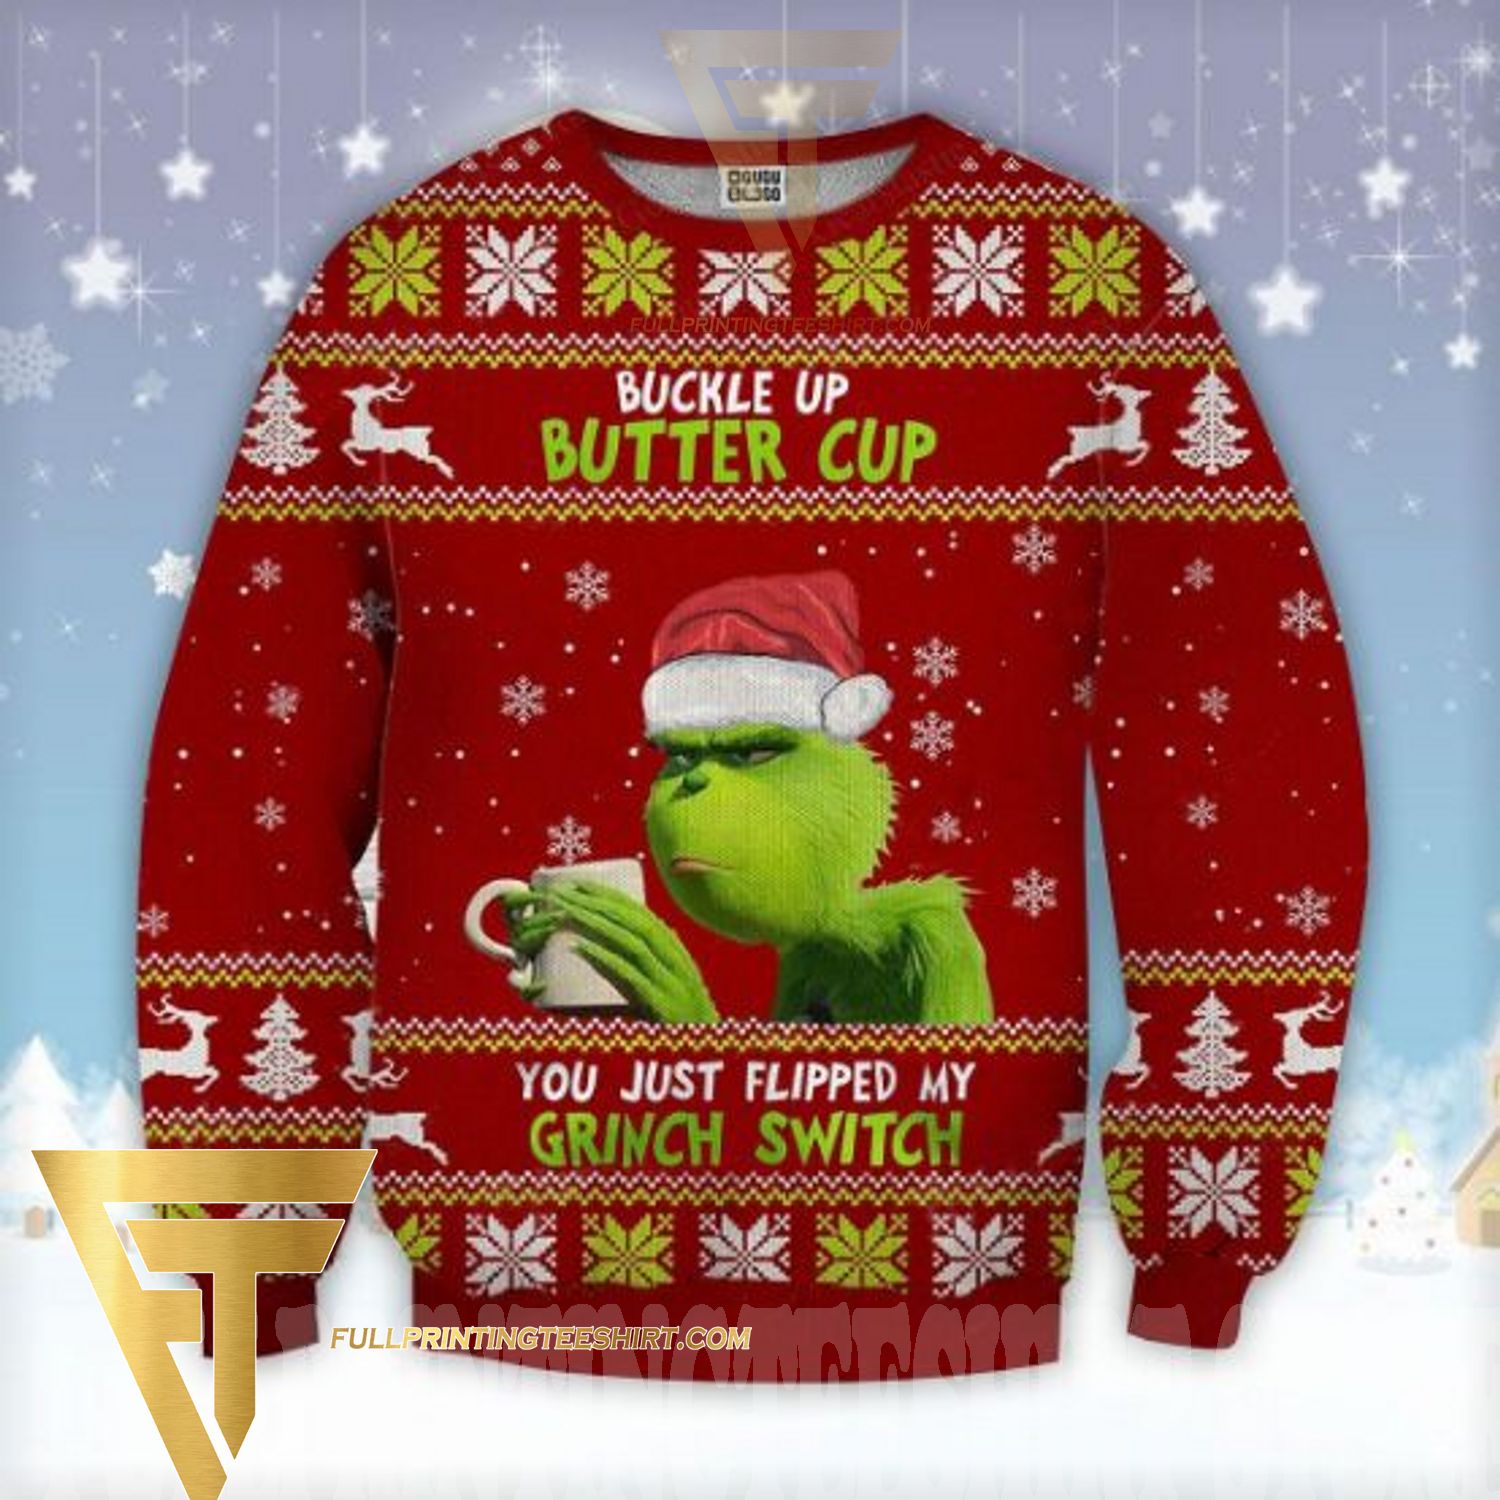 Buckle Up Buttercup You Just Flipped My Grinch Switch Ugly Christmas Wool Knitted Sweater